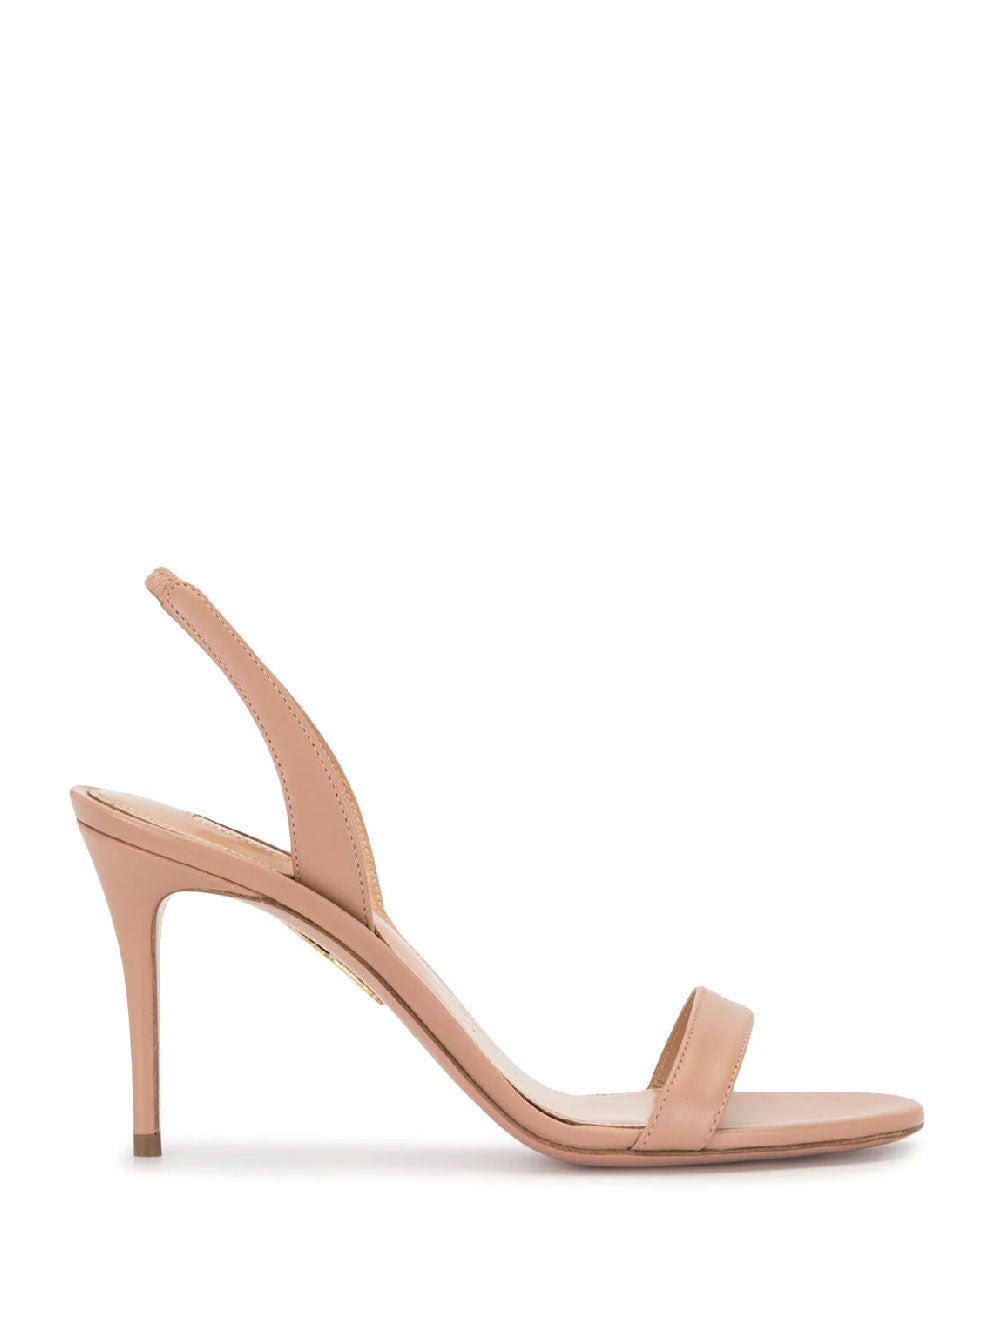 So Nude sandals